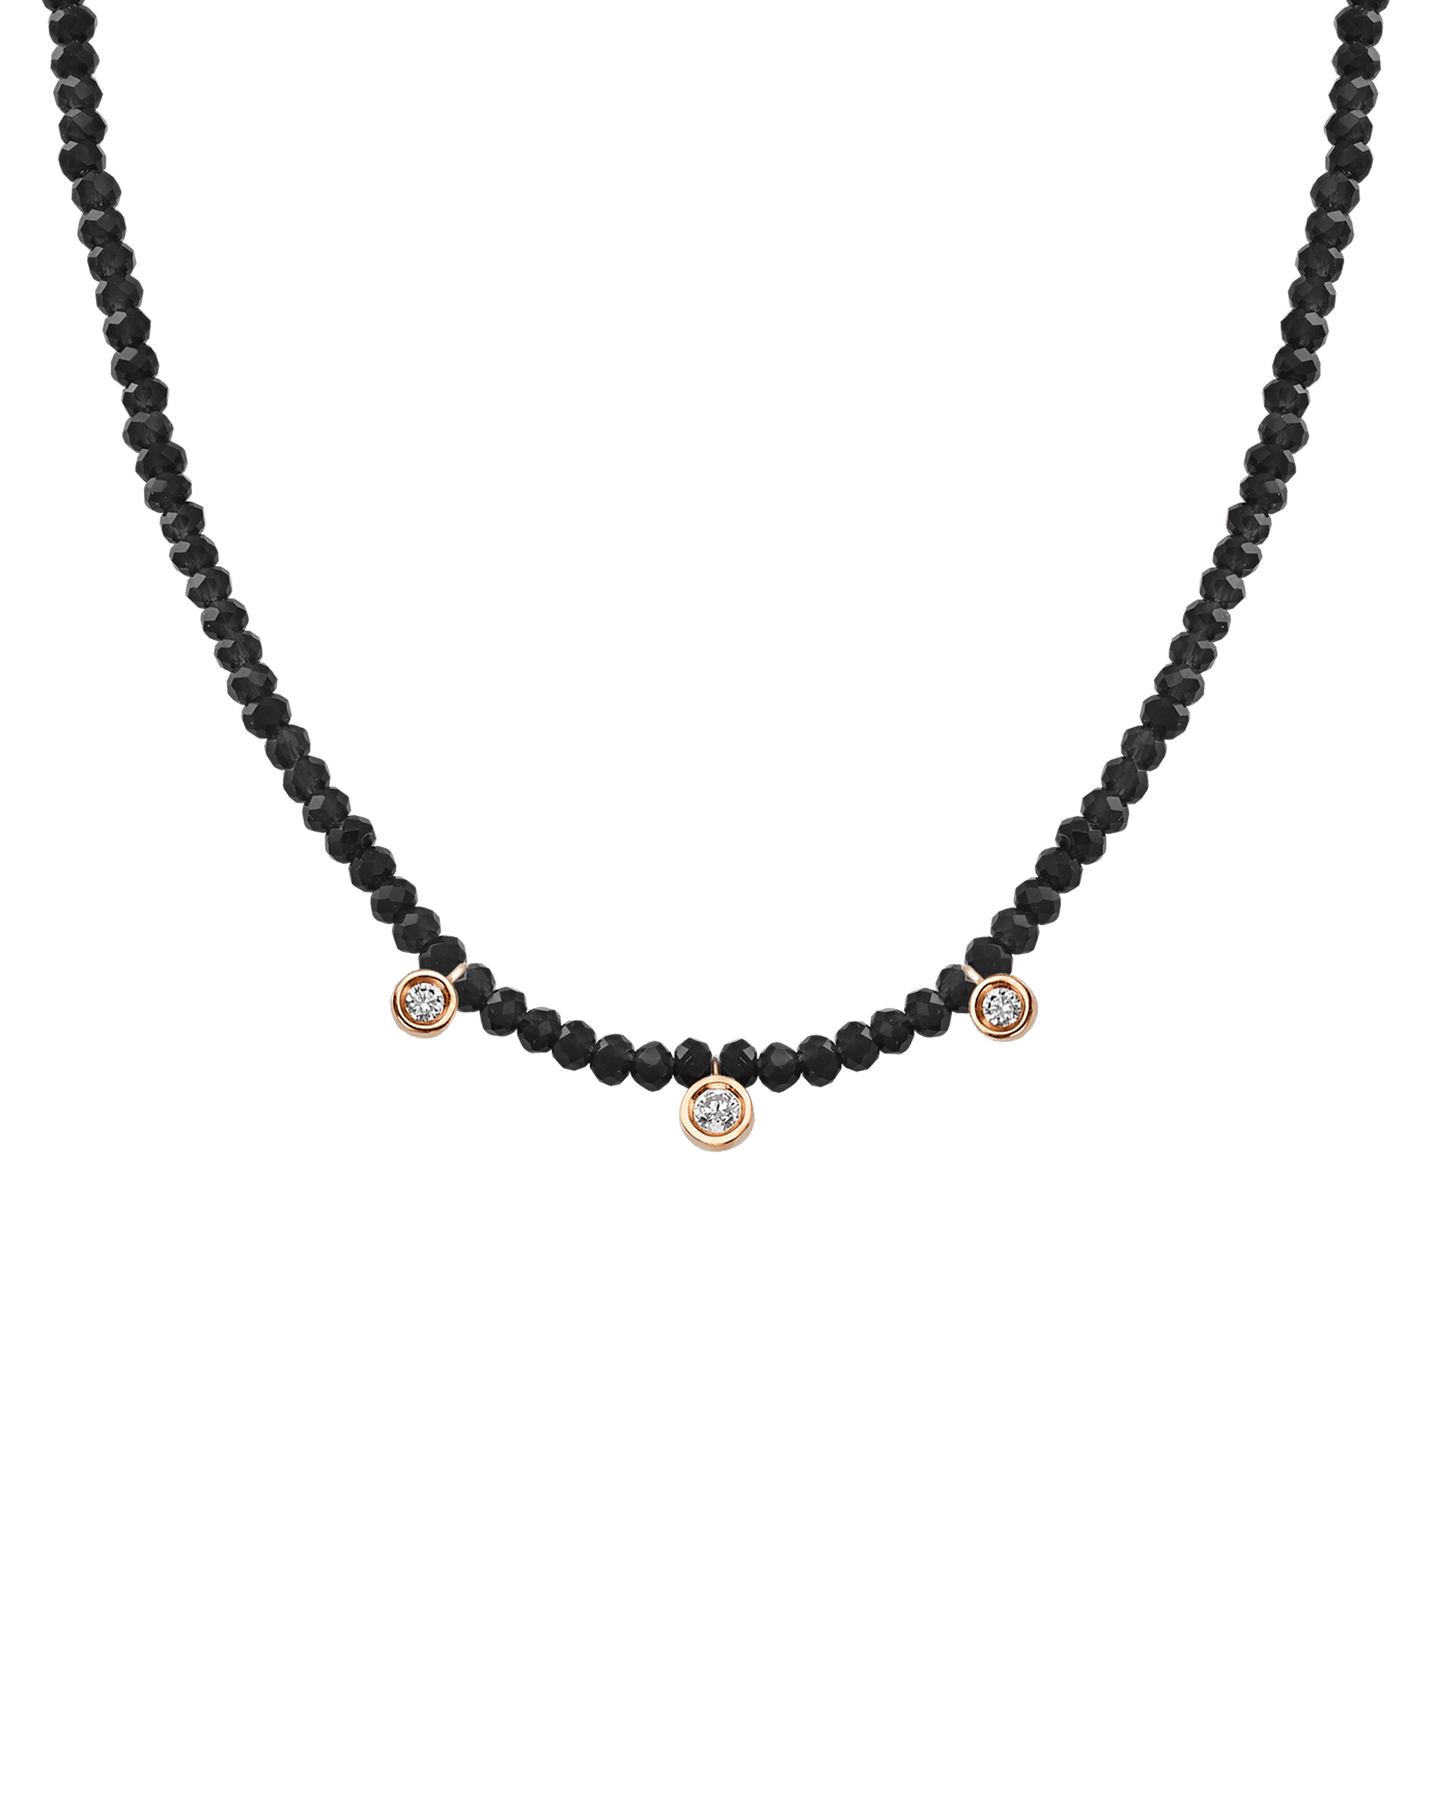 Moonstone Gemstone & Three diamonds Necklace - 14K Rose Gold Necklaces magal-dev Glass Beads Black Spinnel 14" - Collar 